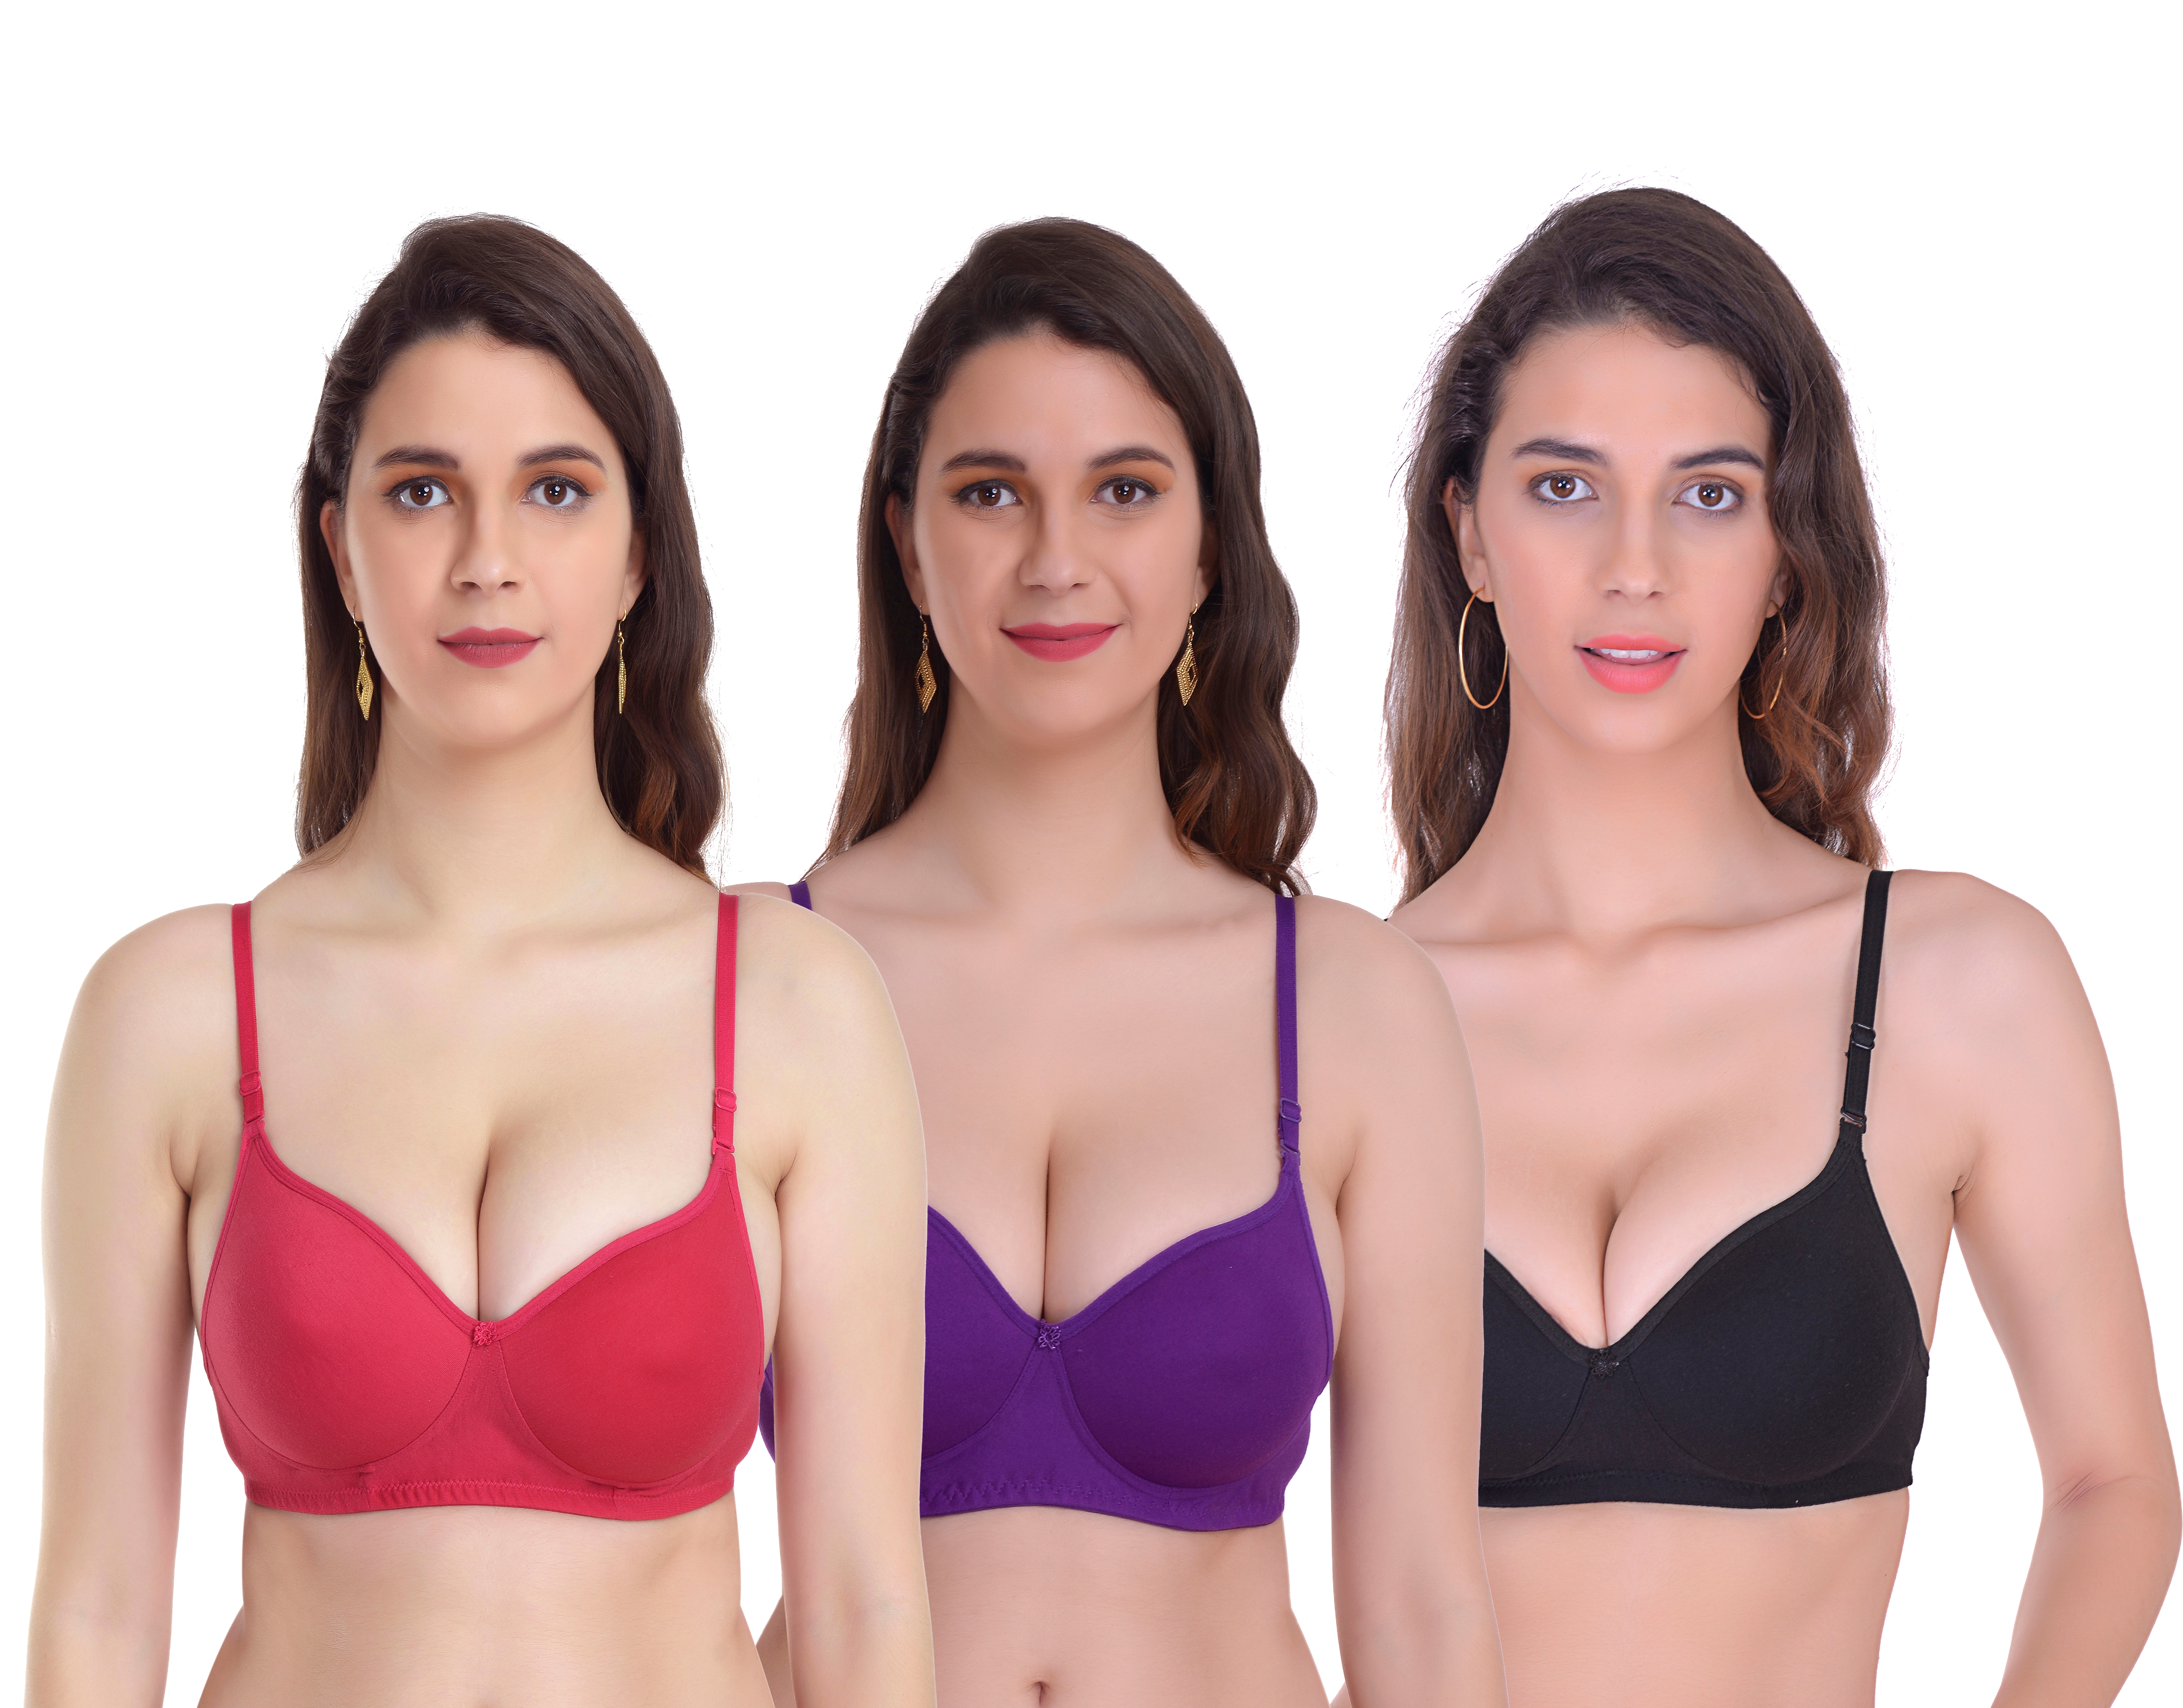 Mynte Women's Cotton Rich Lightly Padded Non-Wired Full Cup Regular Bra (Pack of 3) (Pink/Purple/Black,30) (MY-CPPB-7HRVBK-30)